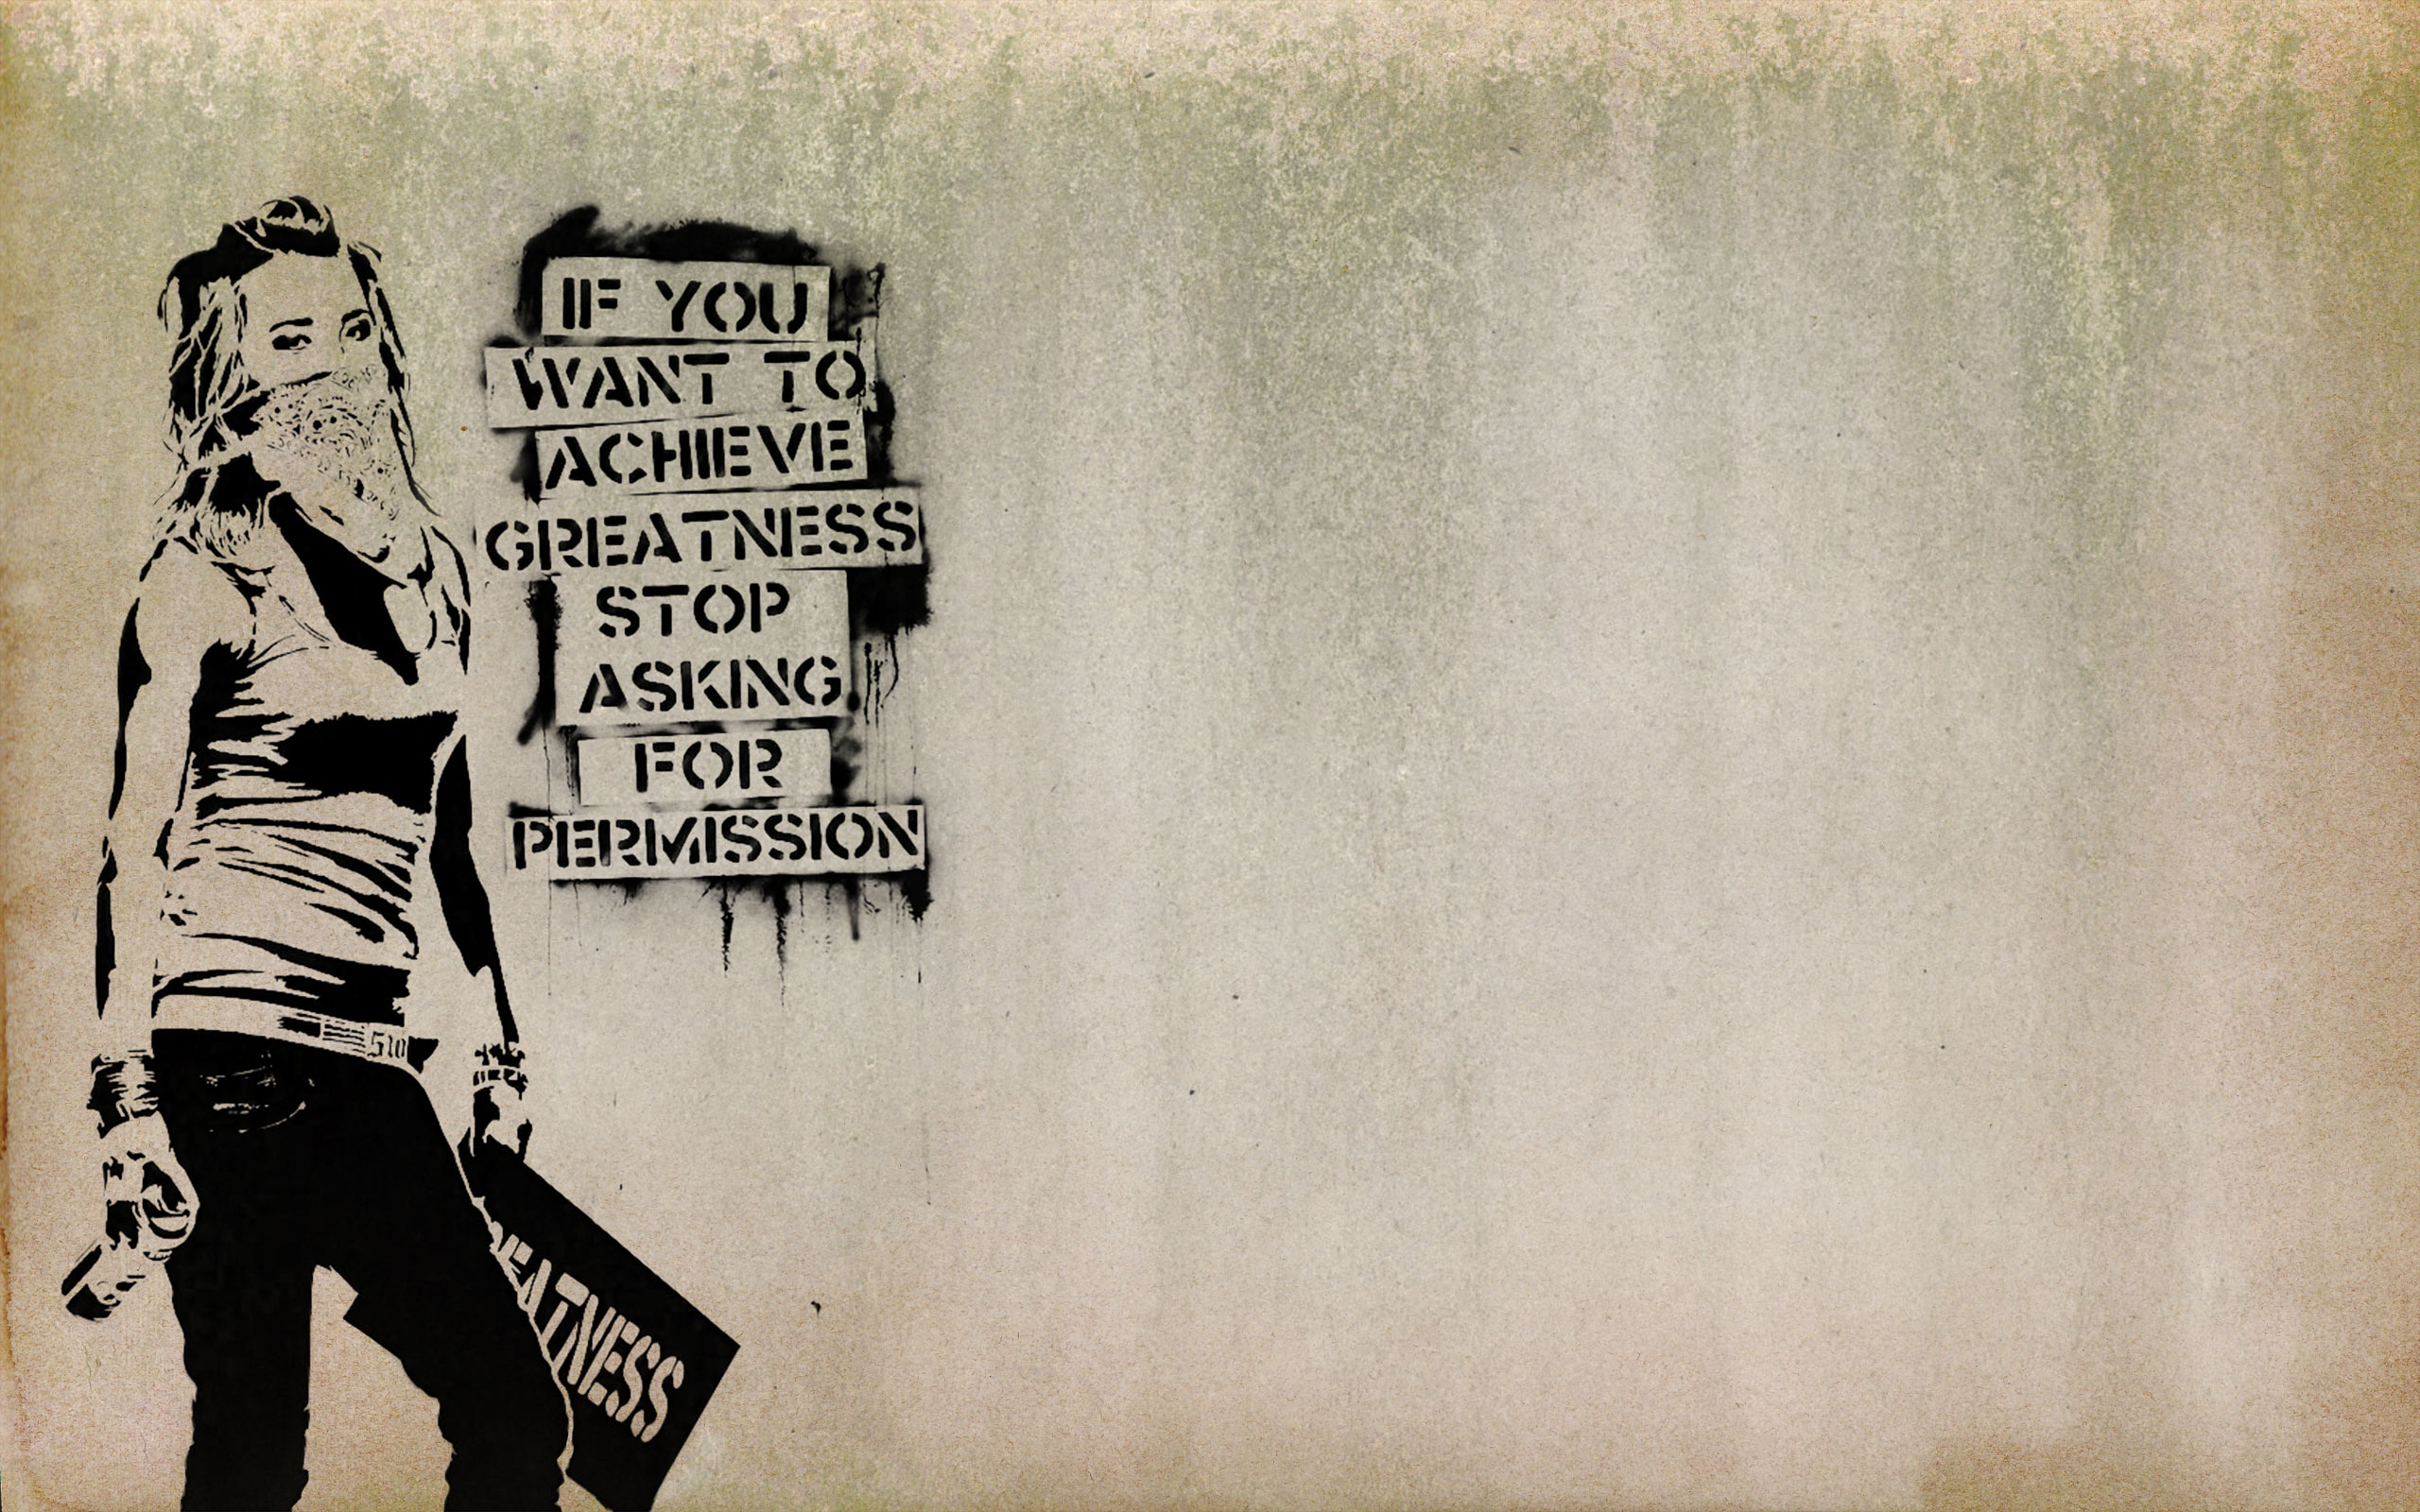 This Banksy-style wallpaper is perfect for artists and other creative types.